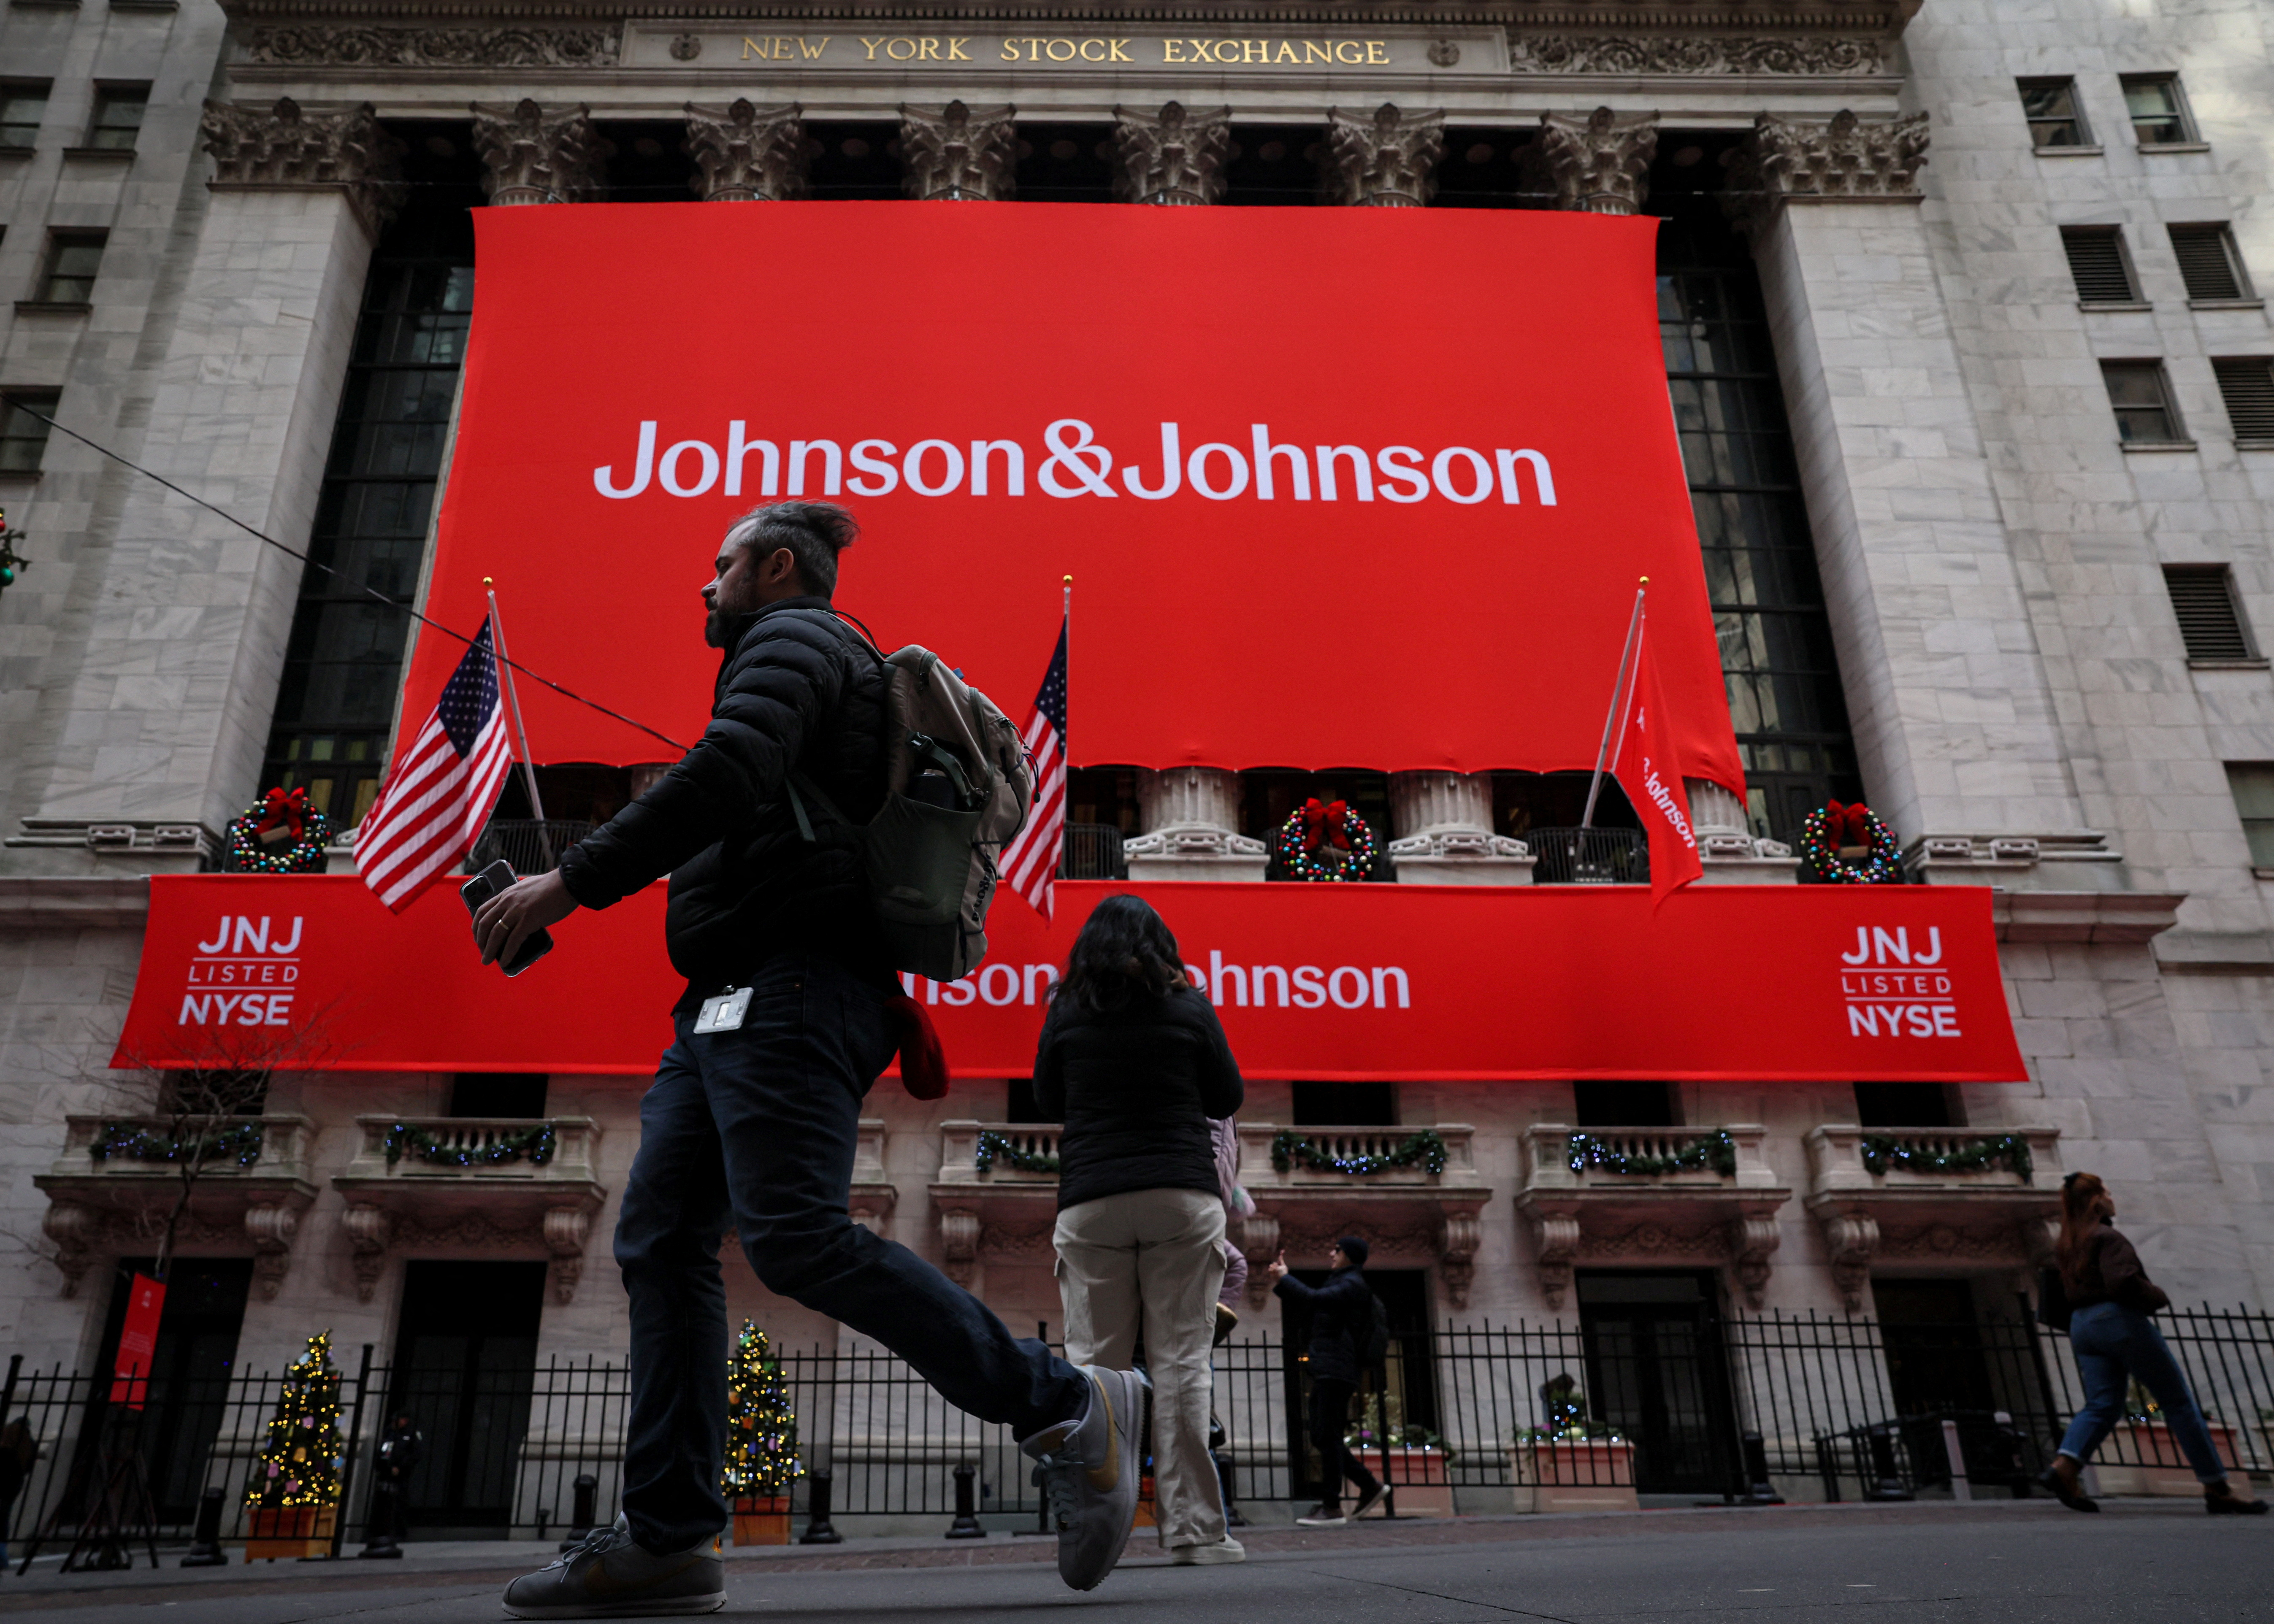 A Johnson & Johnson banner is displayed on the front of the NYSE in New York